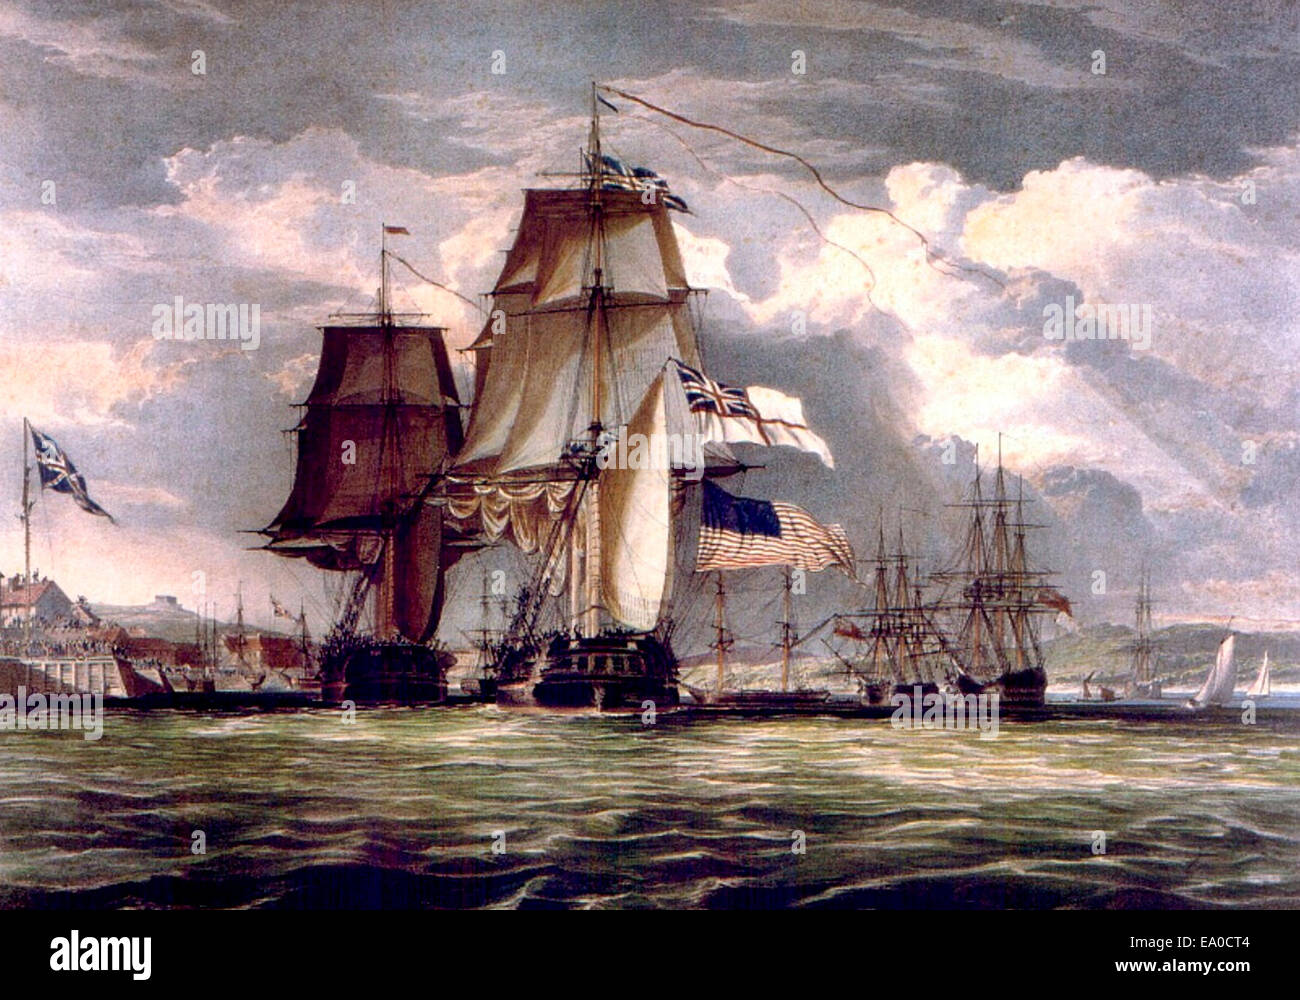 H.M.S. Shannon Leading Her Prize the American Frigate Chesapeake into Halifax Harbour, 1813, during the War of 1812. Stock Photo